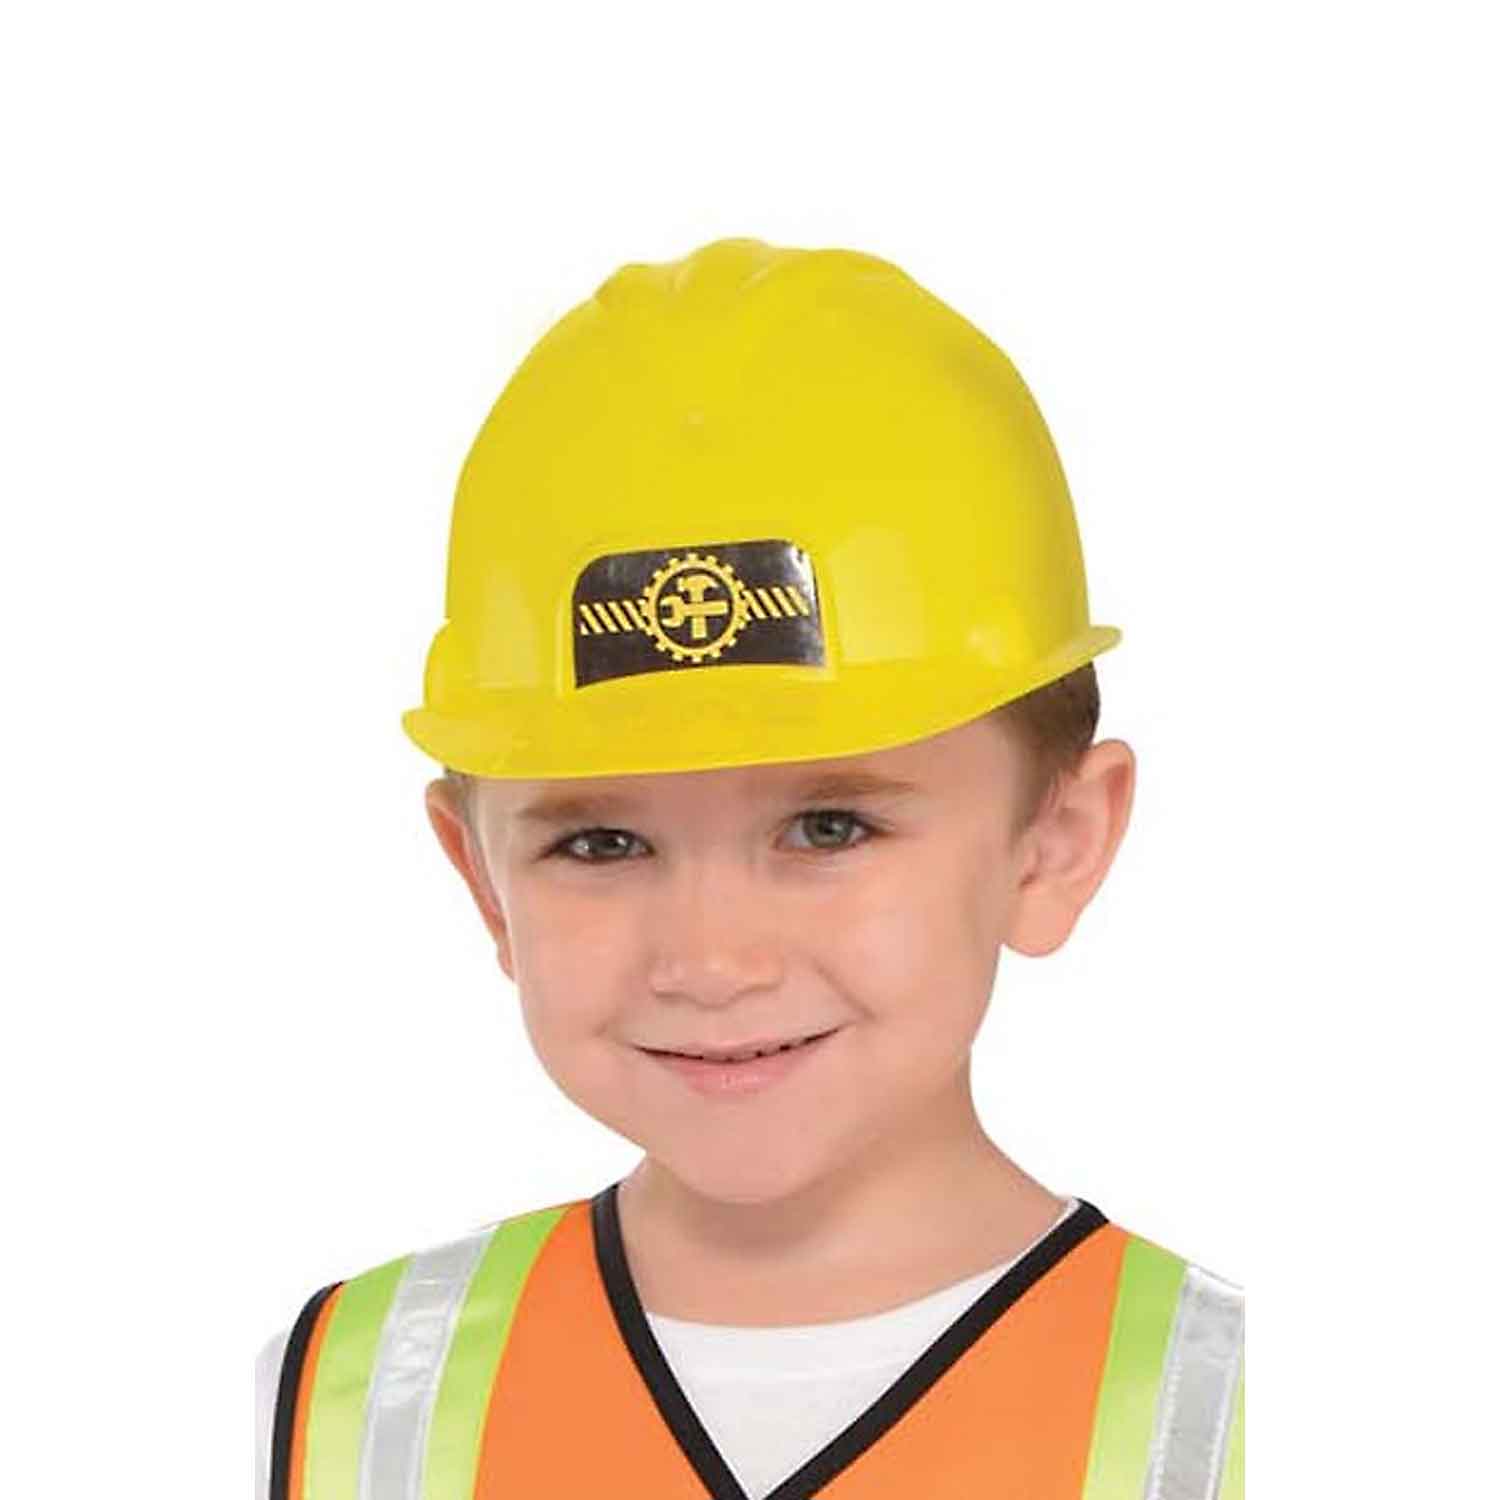 Construction Worker's Hat Costumes & Apparel - Party Centre